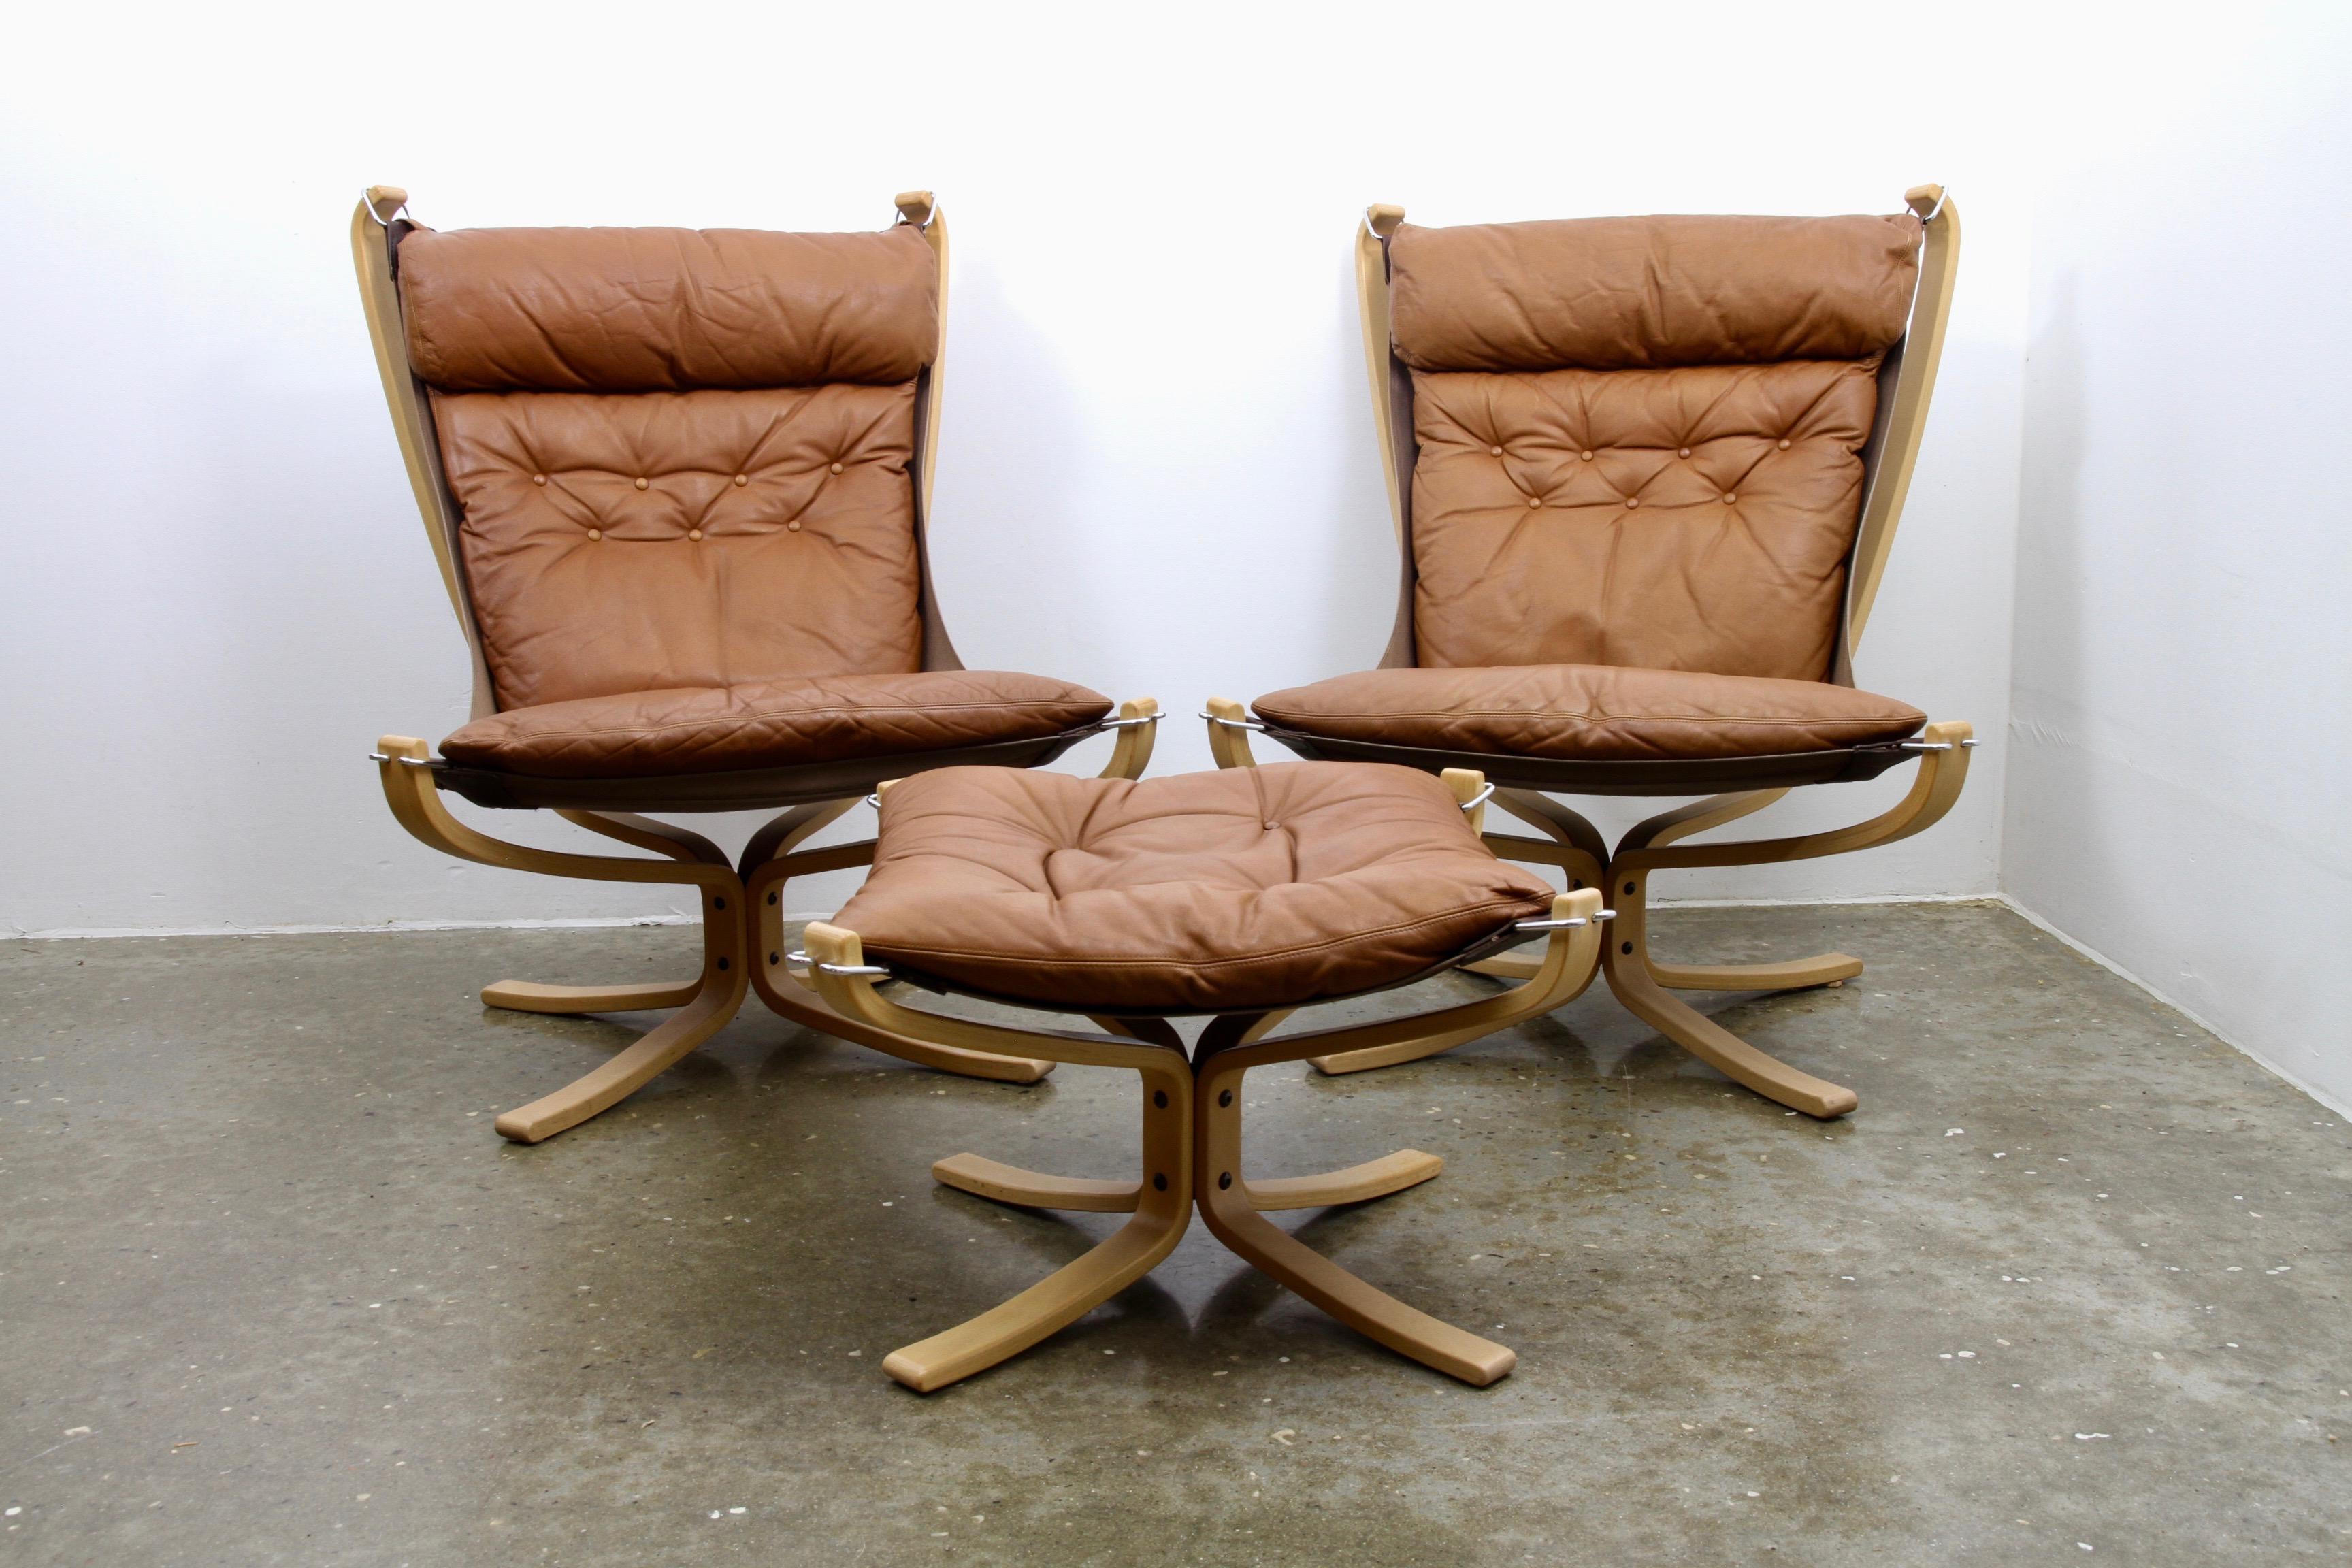 Pair of Scandinavian modern high back lounge chairs with beech frame and leather cushions. Seat is suspended from the frame for great comfort. Beautiful and soft light brown leather. Very light use, extremely good vintage condition. Designed by